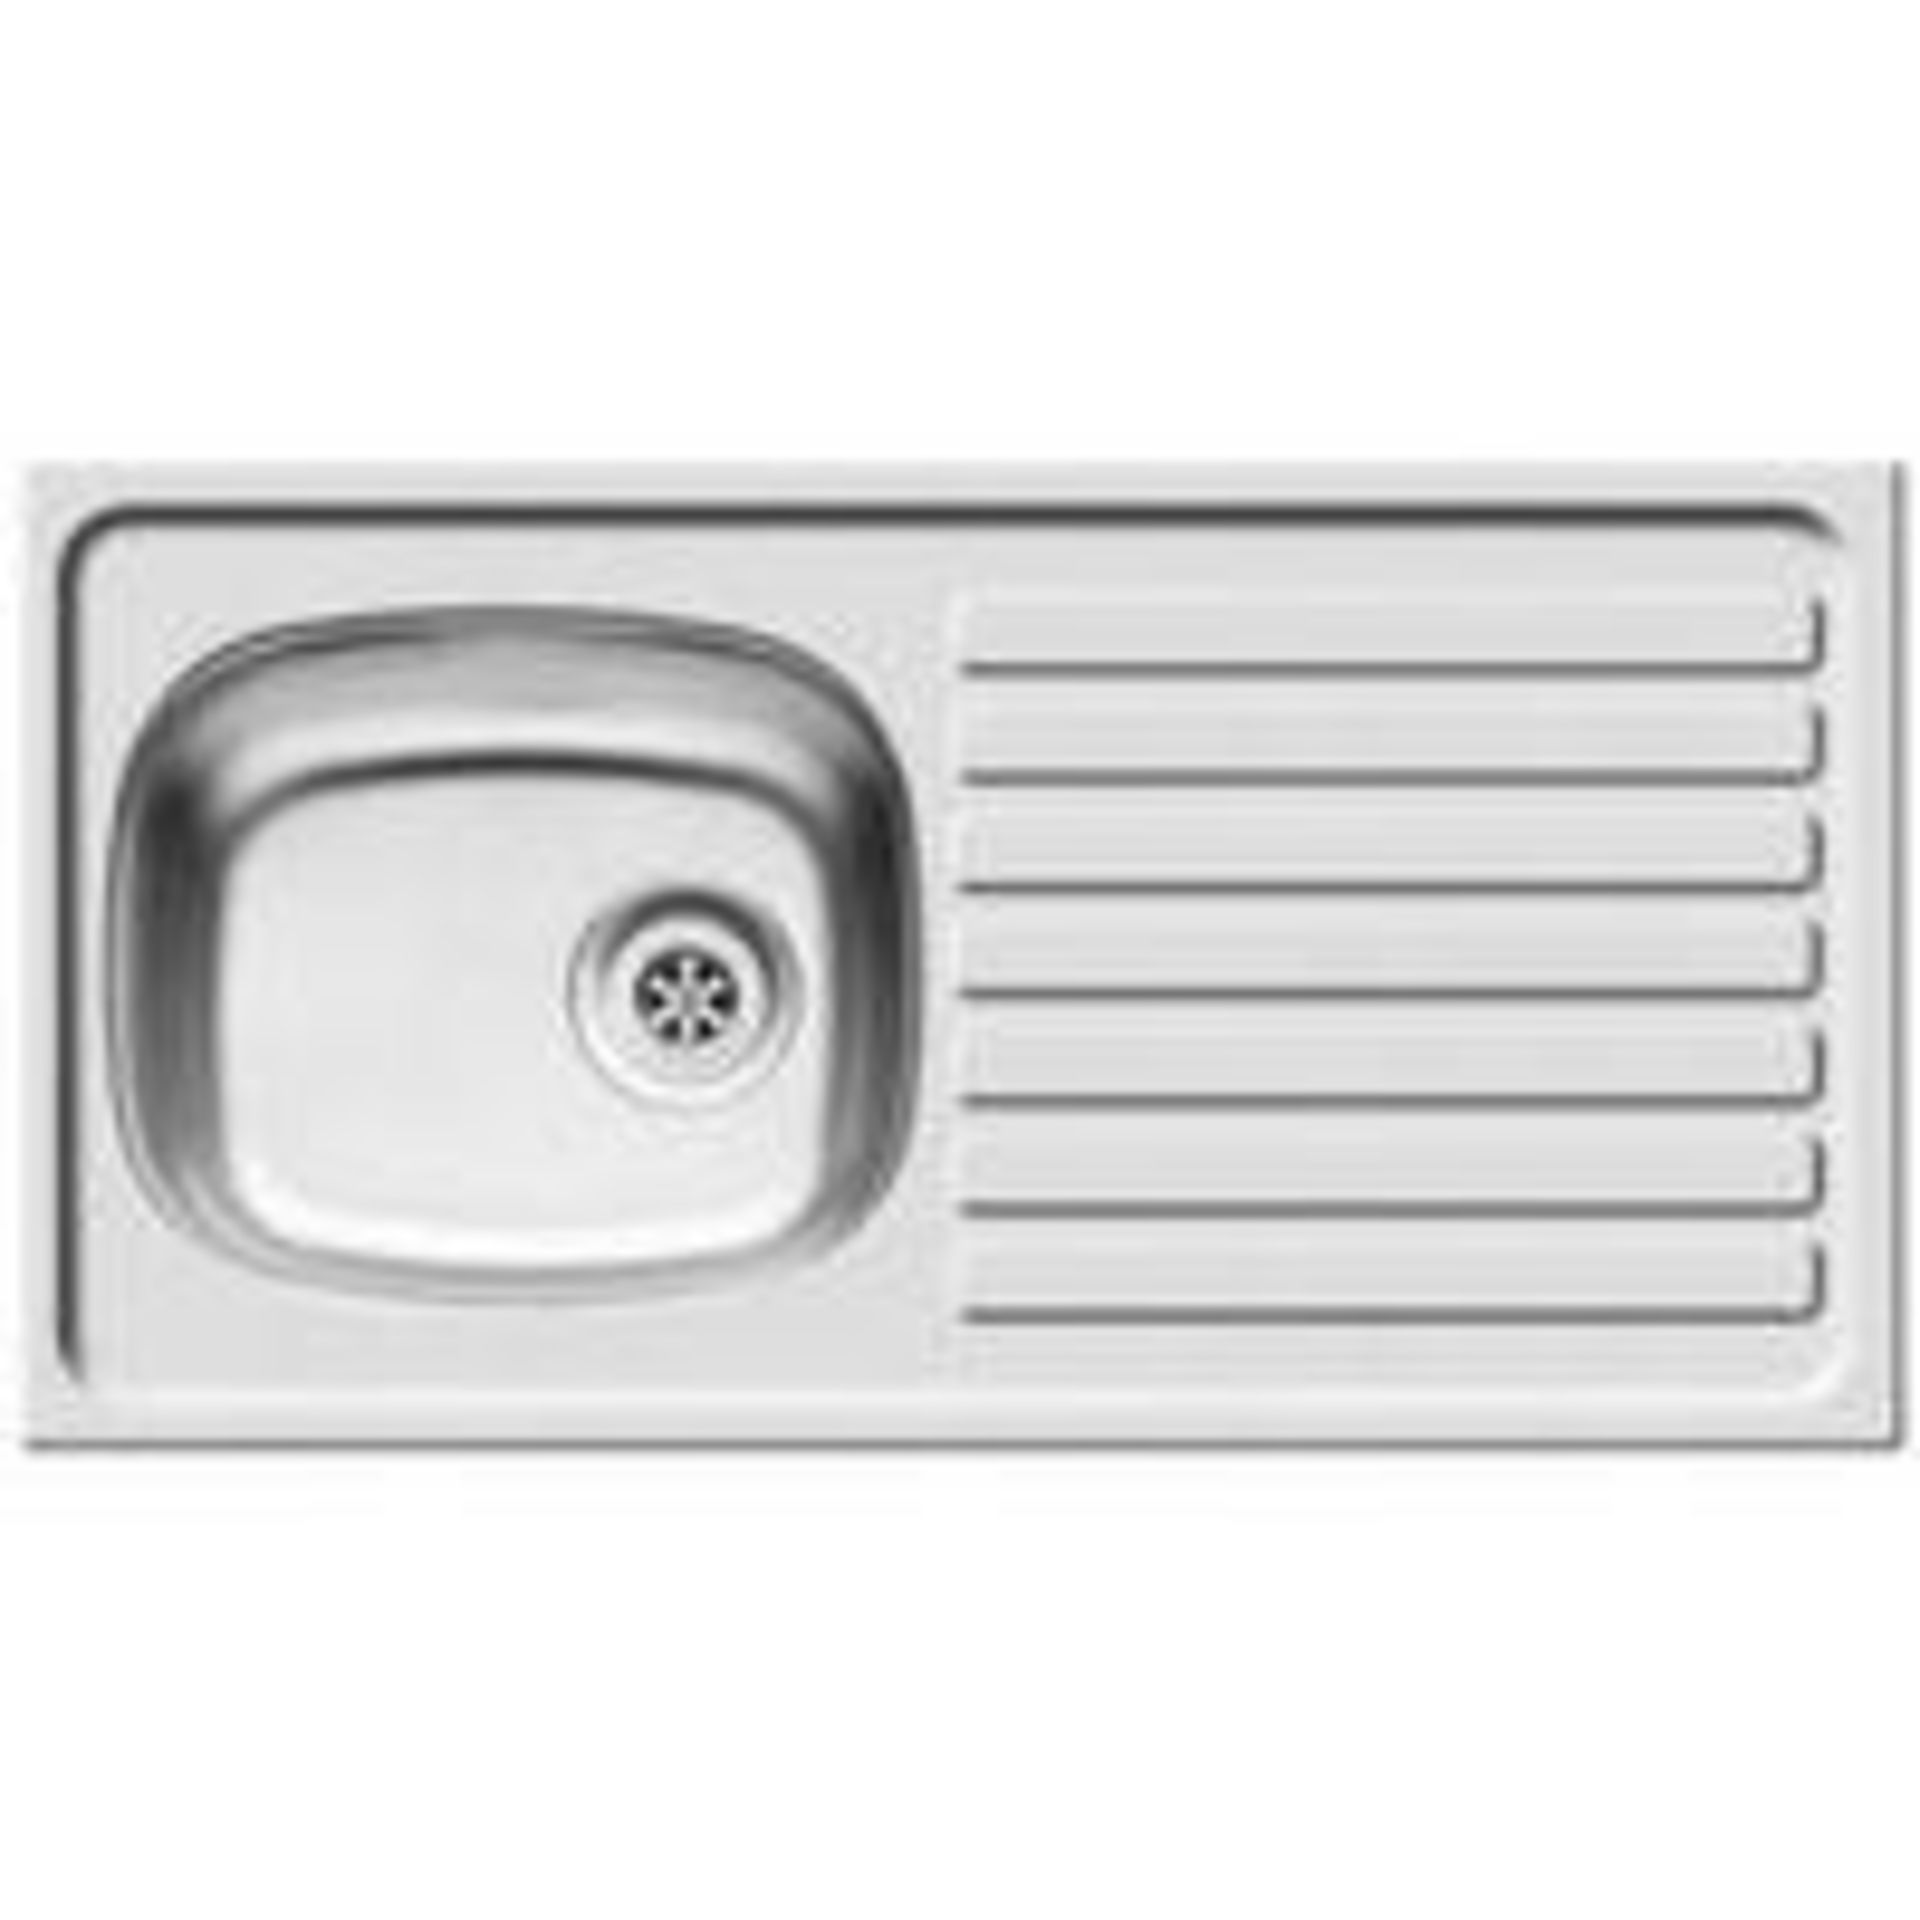 V Brand New Pyramis Kitchen Sink Stainless Steel 1 Bowl 940 x 160mm RRP £39.99 - Image 3 of 3